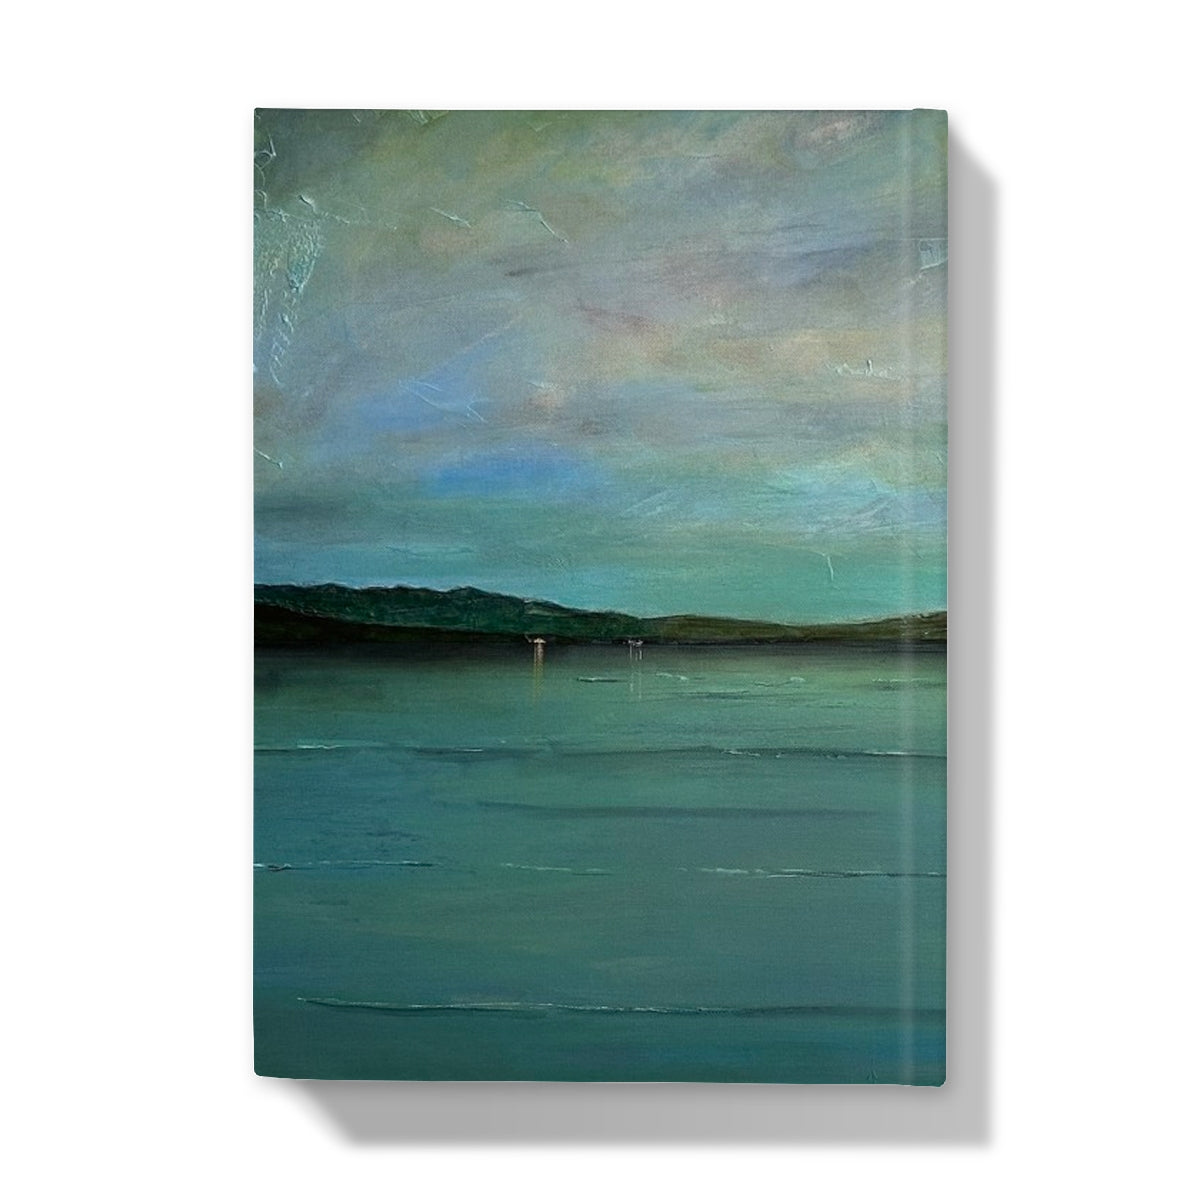 An Ethereal Loch Lomond Art Gifts Hardback Journal-Journals & Notebooks-Scottish Lochs & Mountains Art Gallery-Paintings, Prints, Homeware, Art Gifts From Scotland By Scottish Artist Kevin Hunter